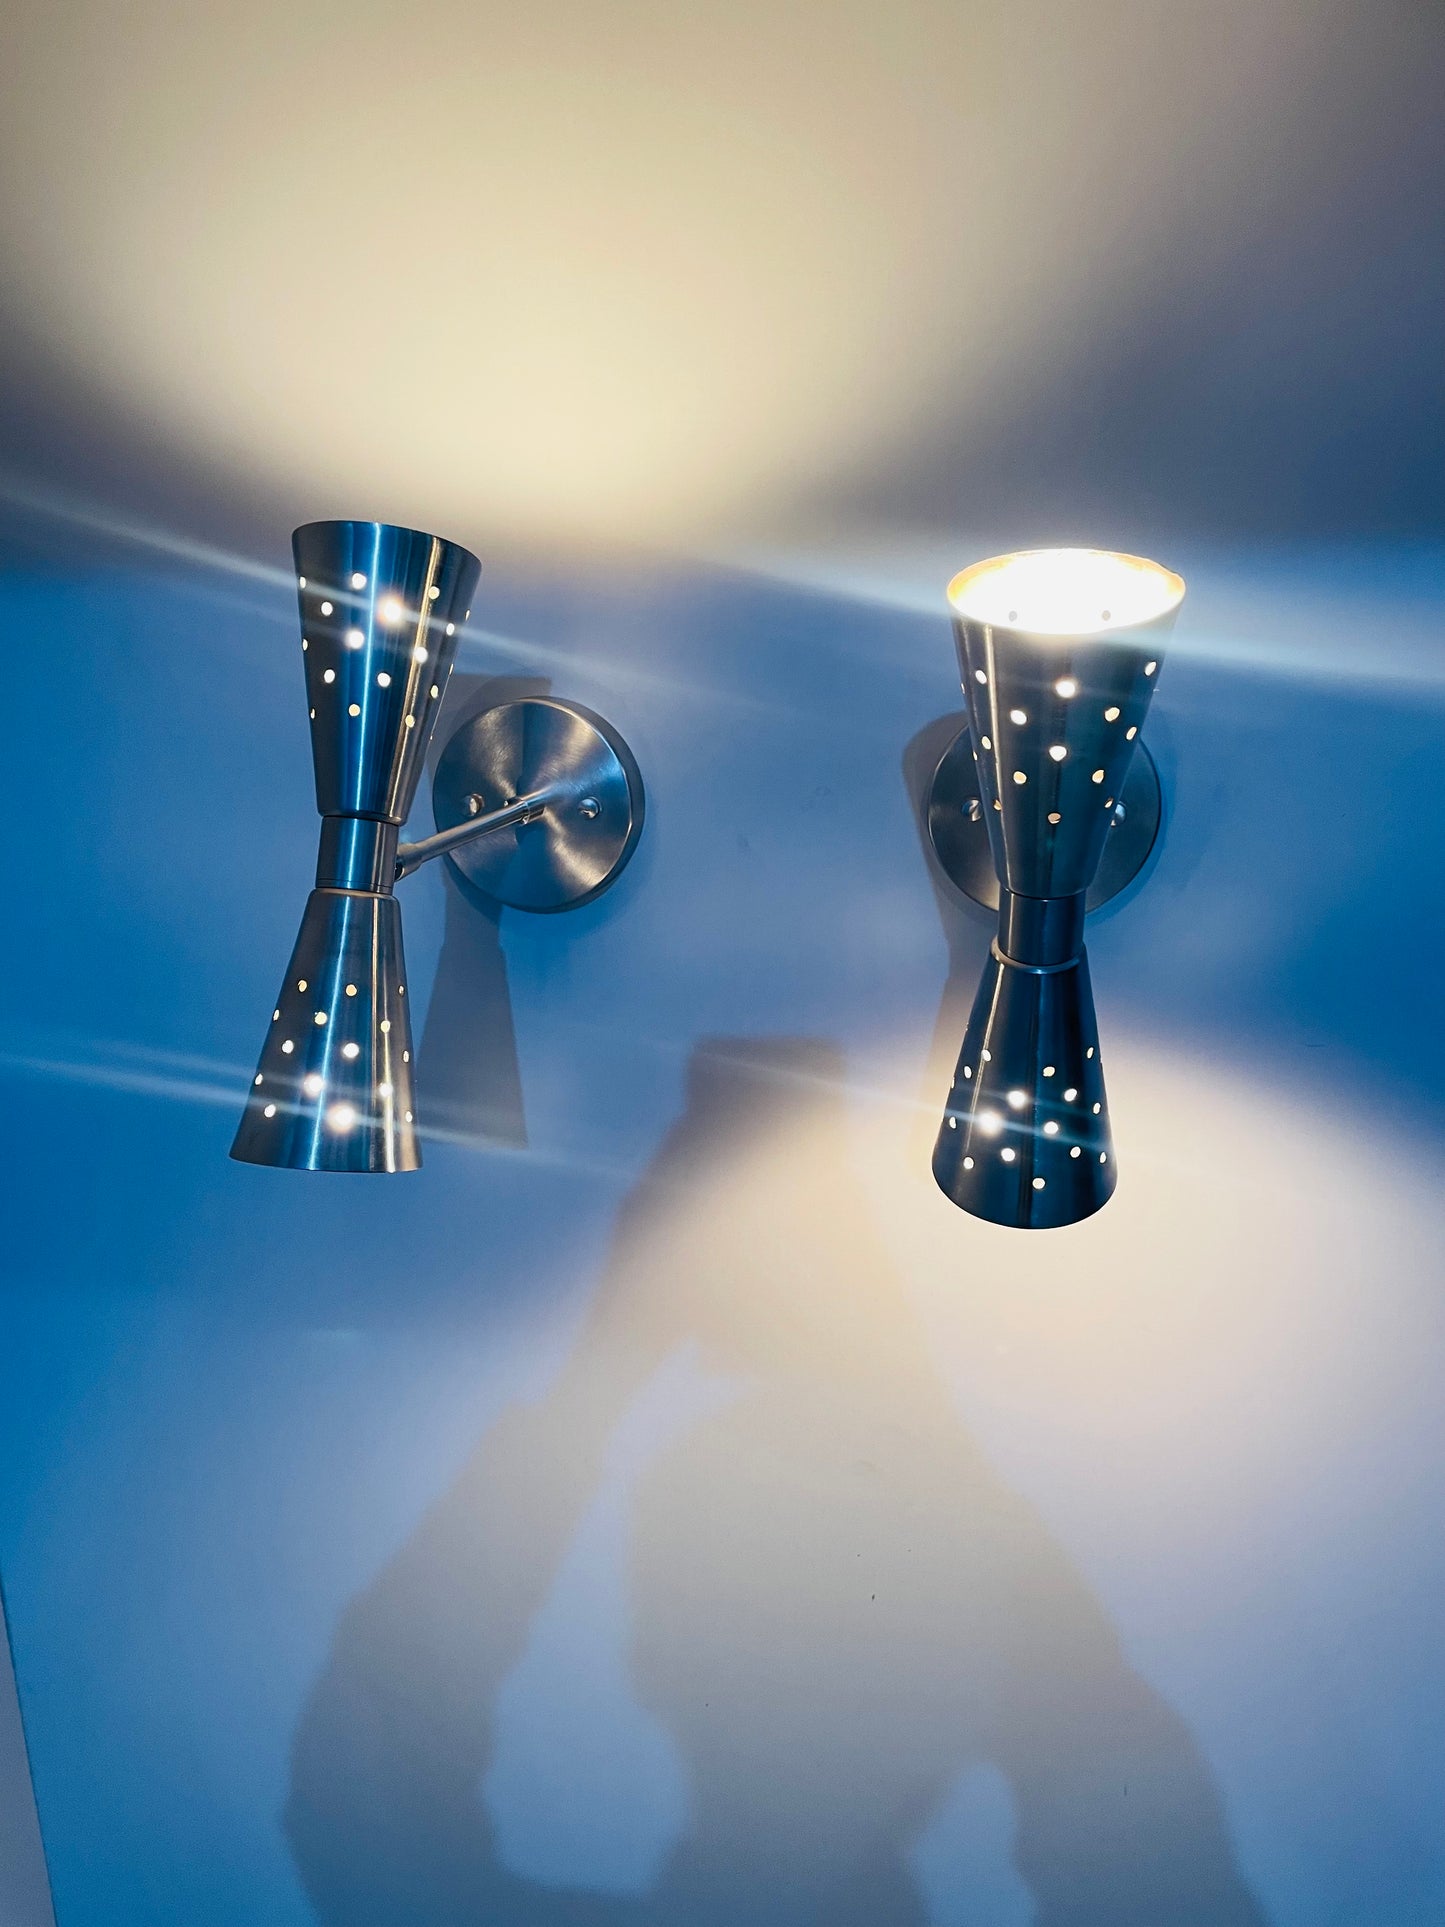 Vintage Charm: Atomic Style Wall Sconces for Unique Lighting Experience